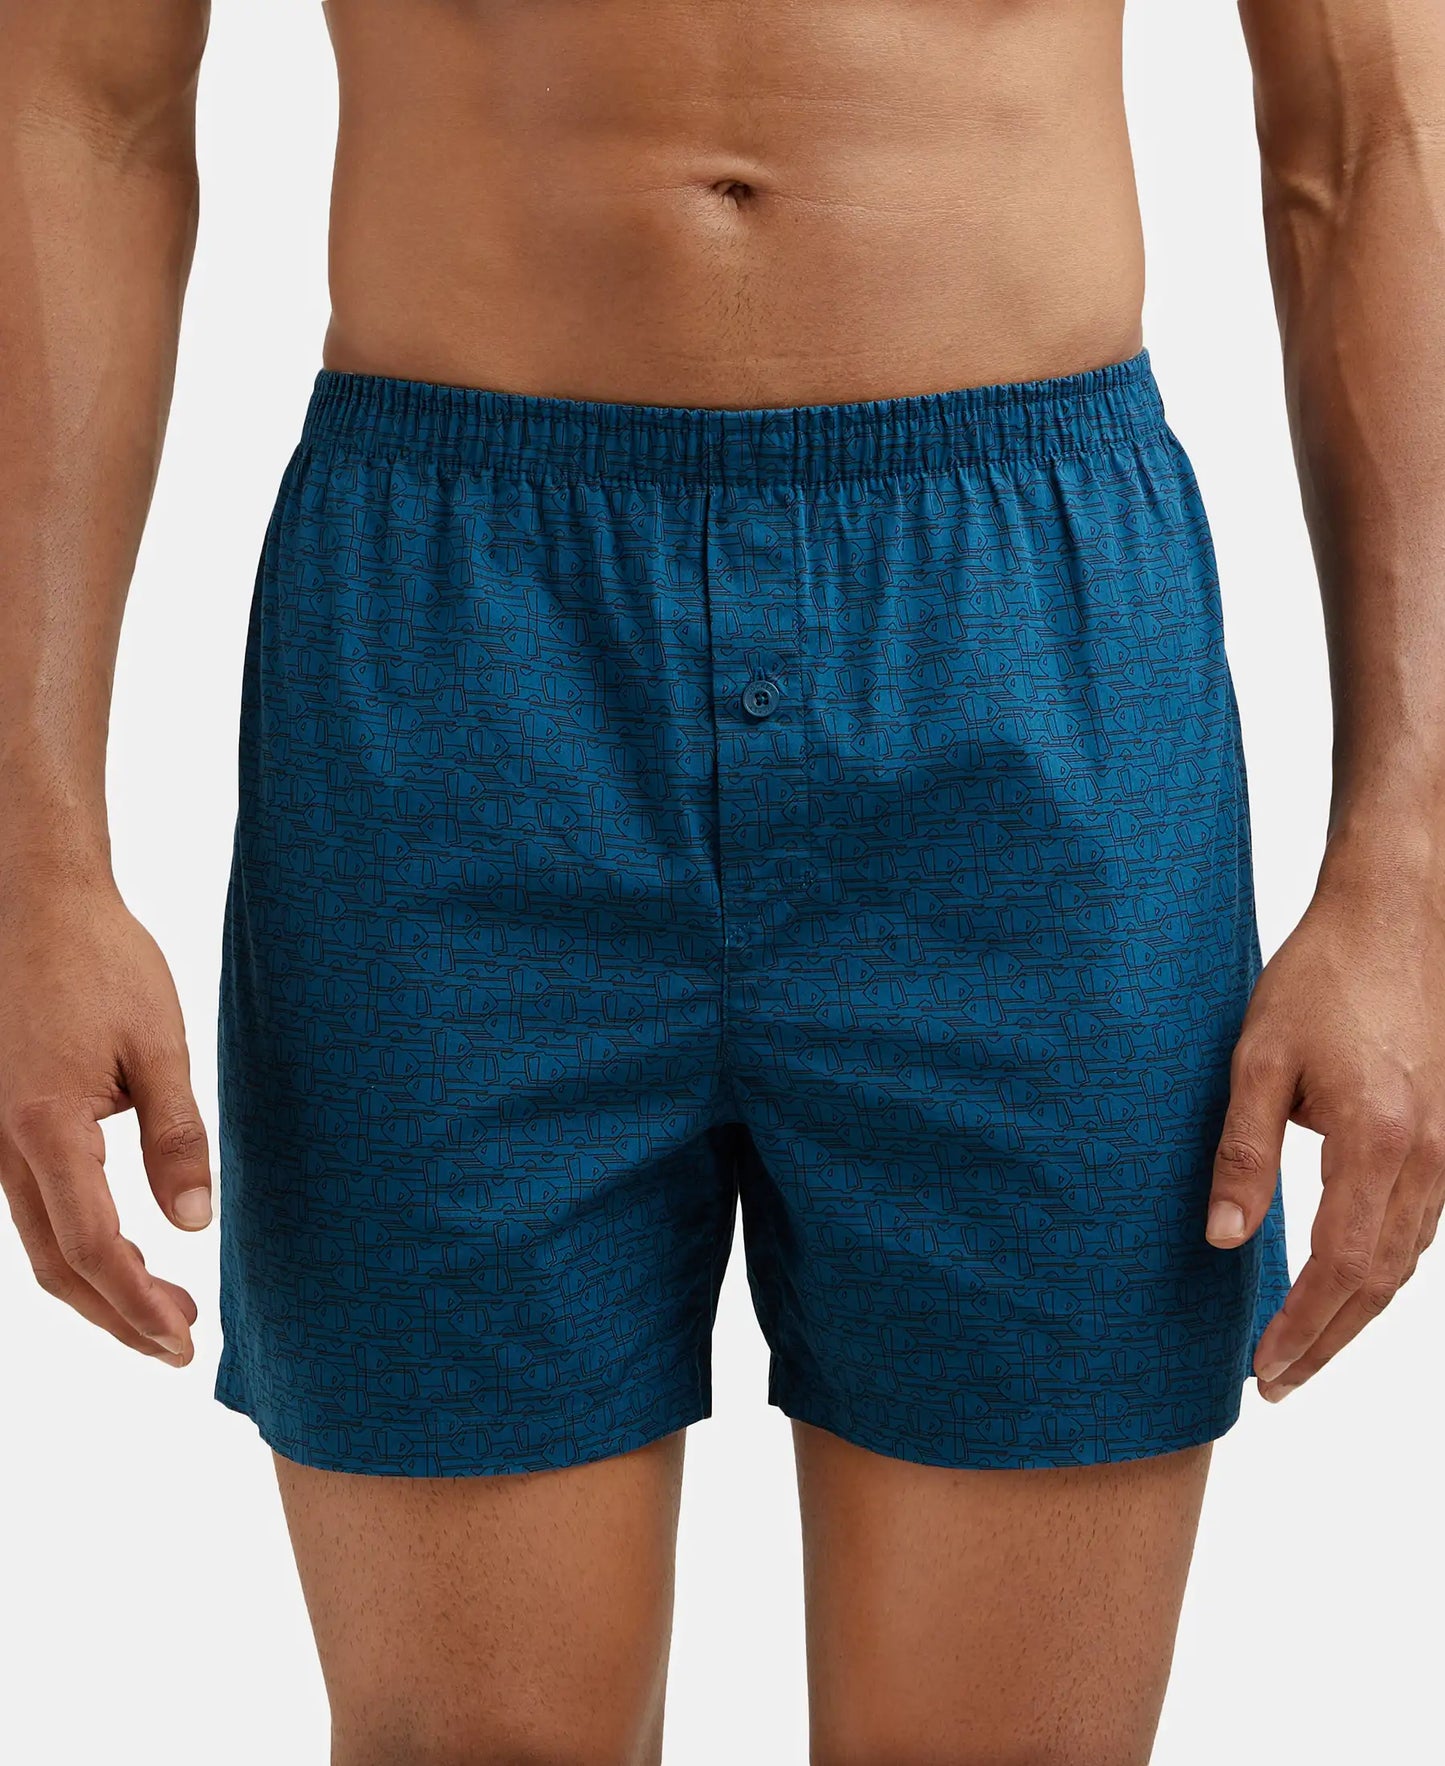 Super Combed Mercerized Cotton Woven Checkered Inner Boxers with Ultrasoft and Durable Inner Waistband - Navy & Seaport Teal-2